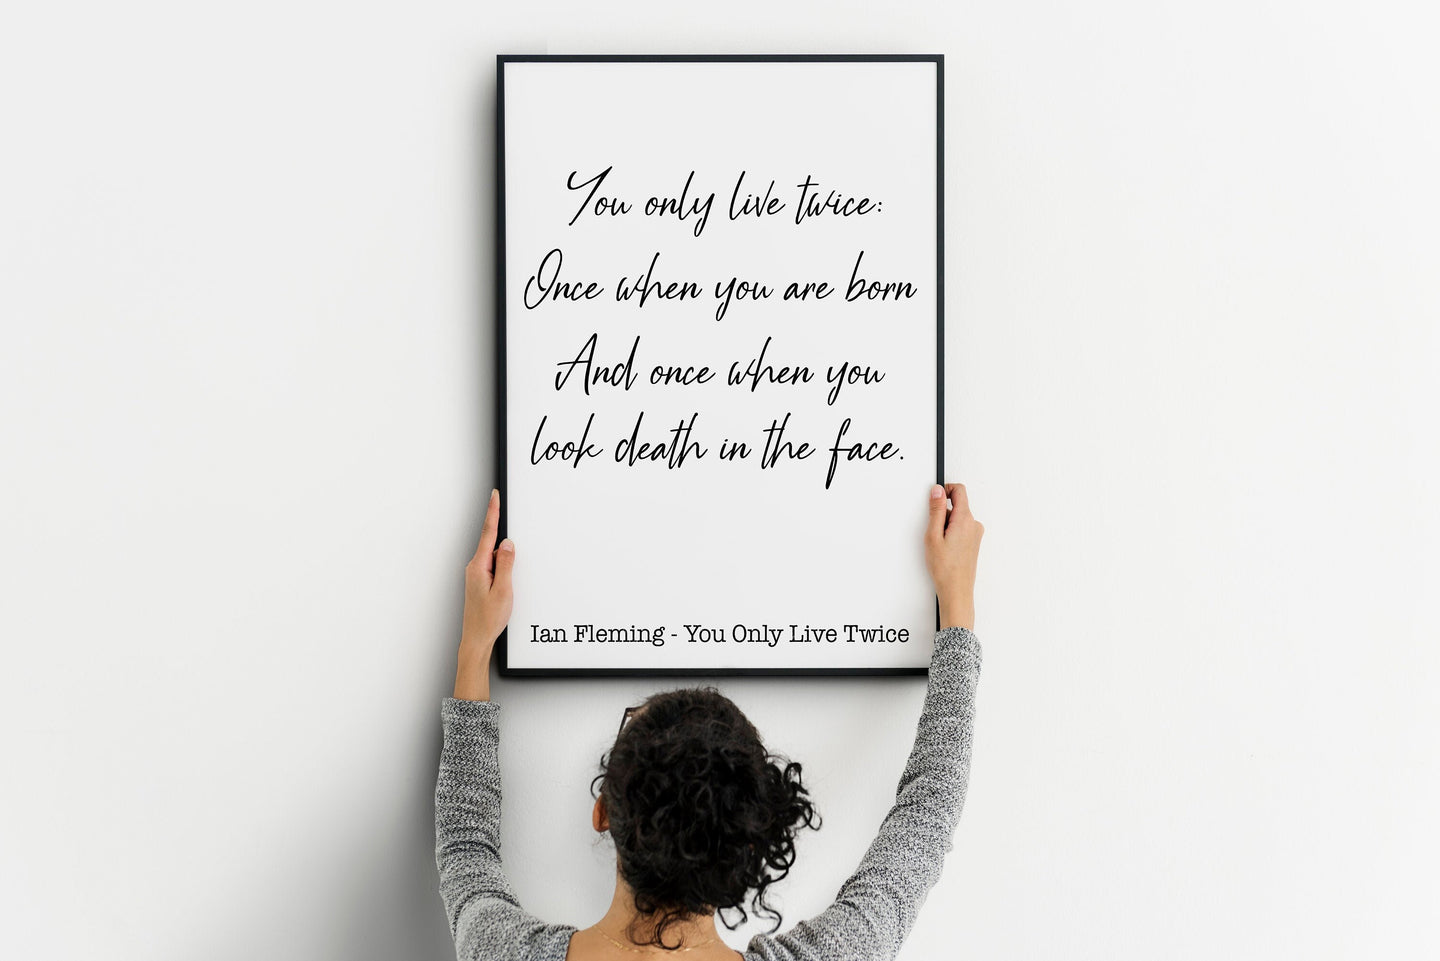 James Bond - Ian Fleming book quote - You only live twice - book quote print - Print for wall decor home library decor UNFRAMED